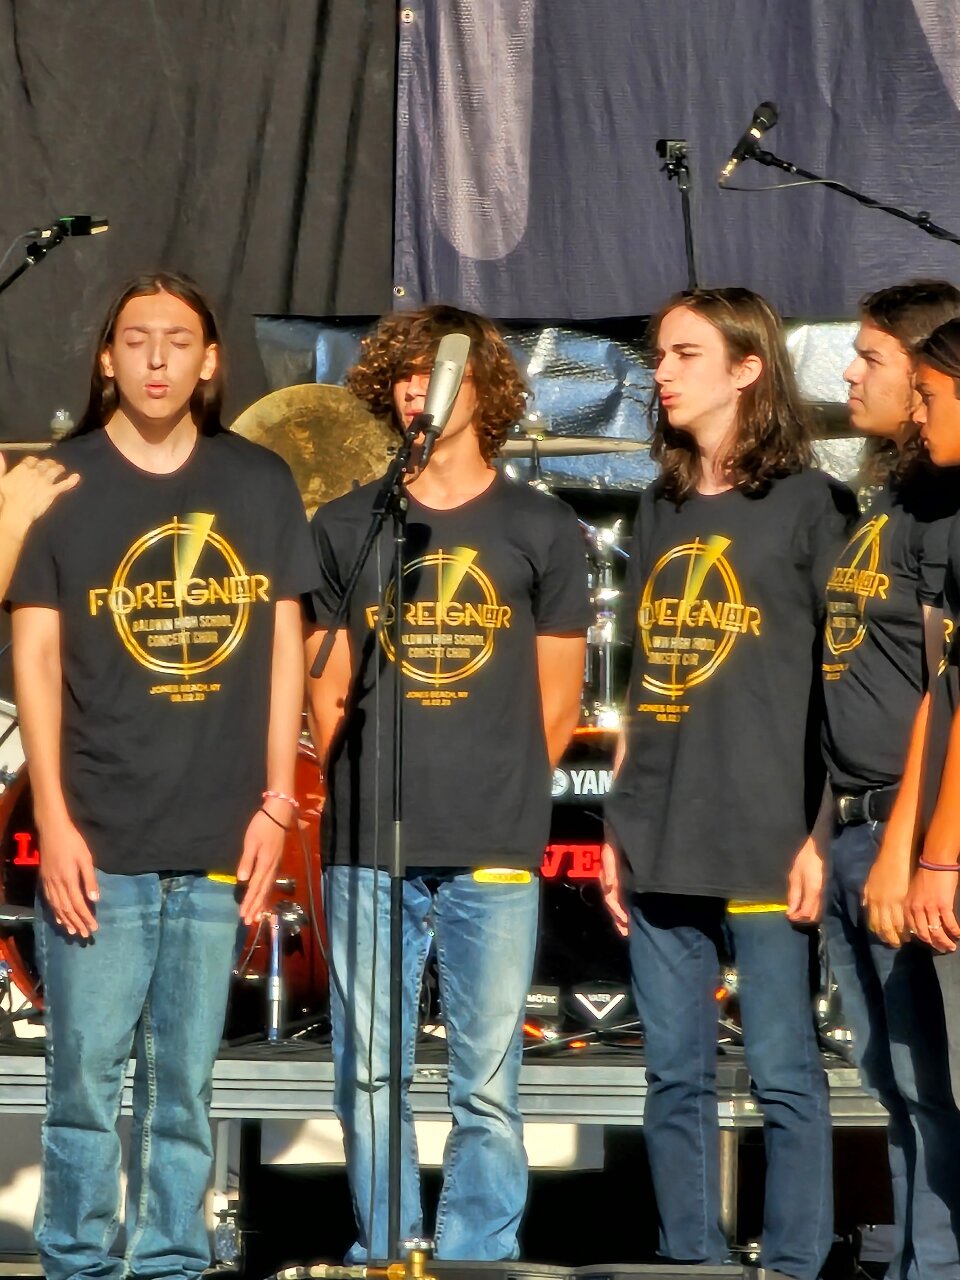 The choir performed at Foreigner’s farewell tour at Jones Beach on August 2.